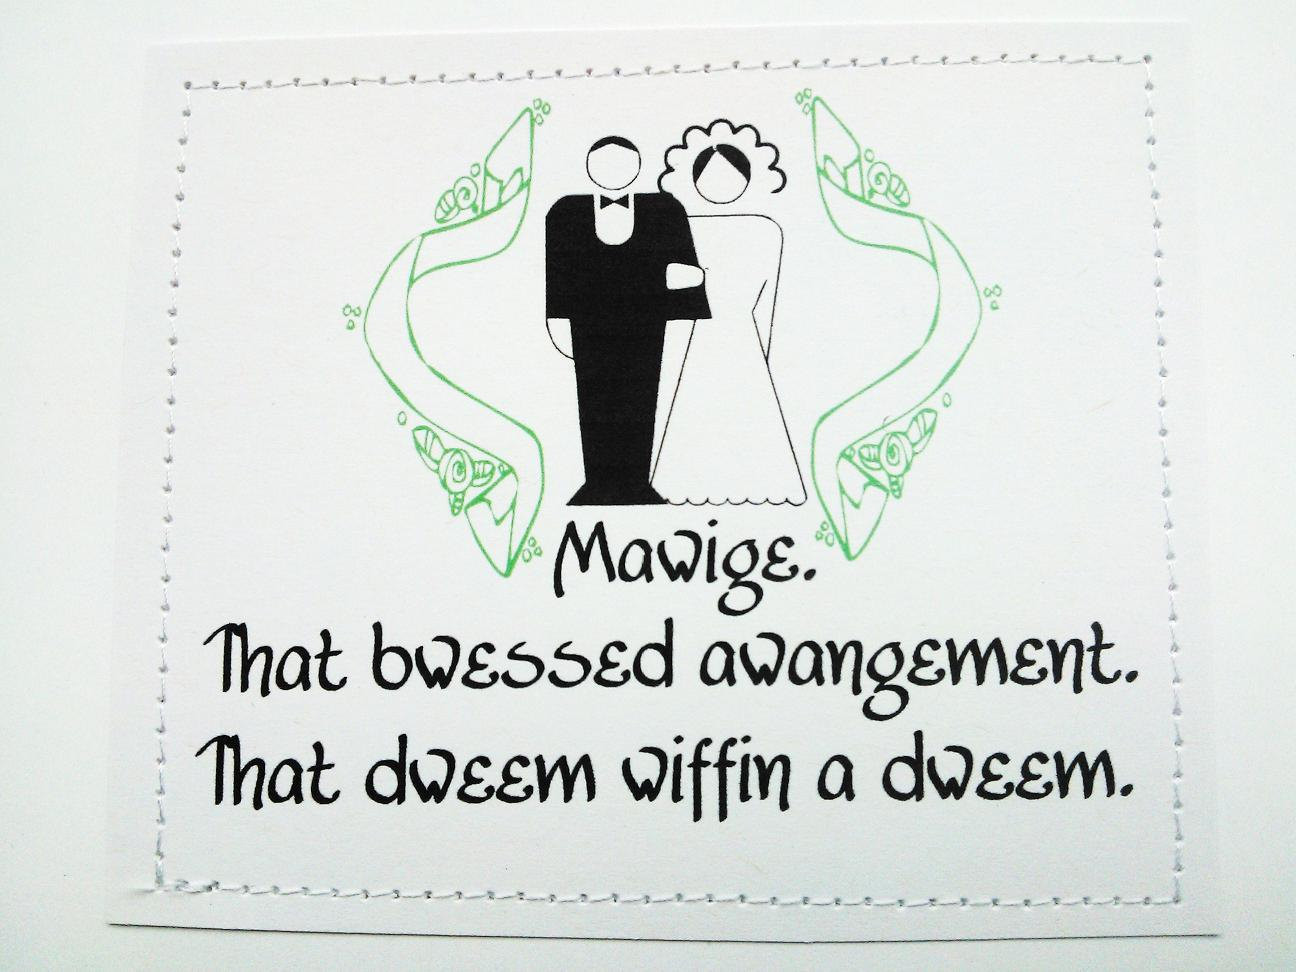 Princess Bride Marriage Quote
 The Princess Bride quote wedding card Mawige by sewdandee